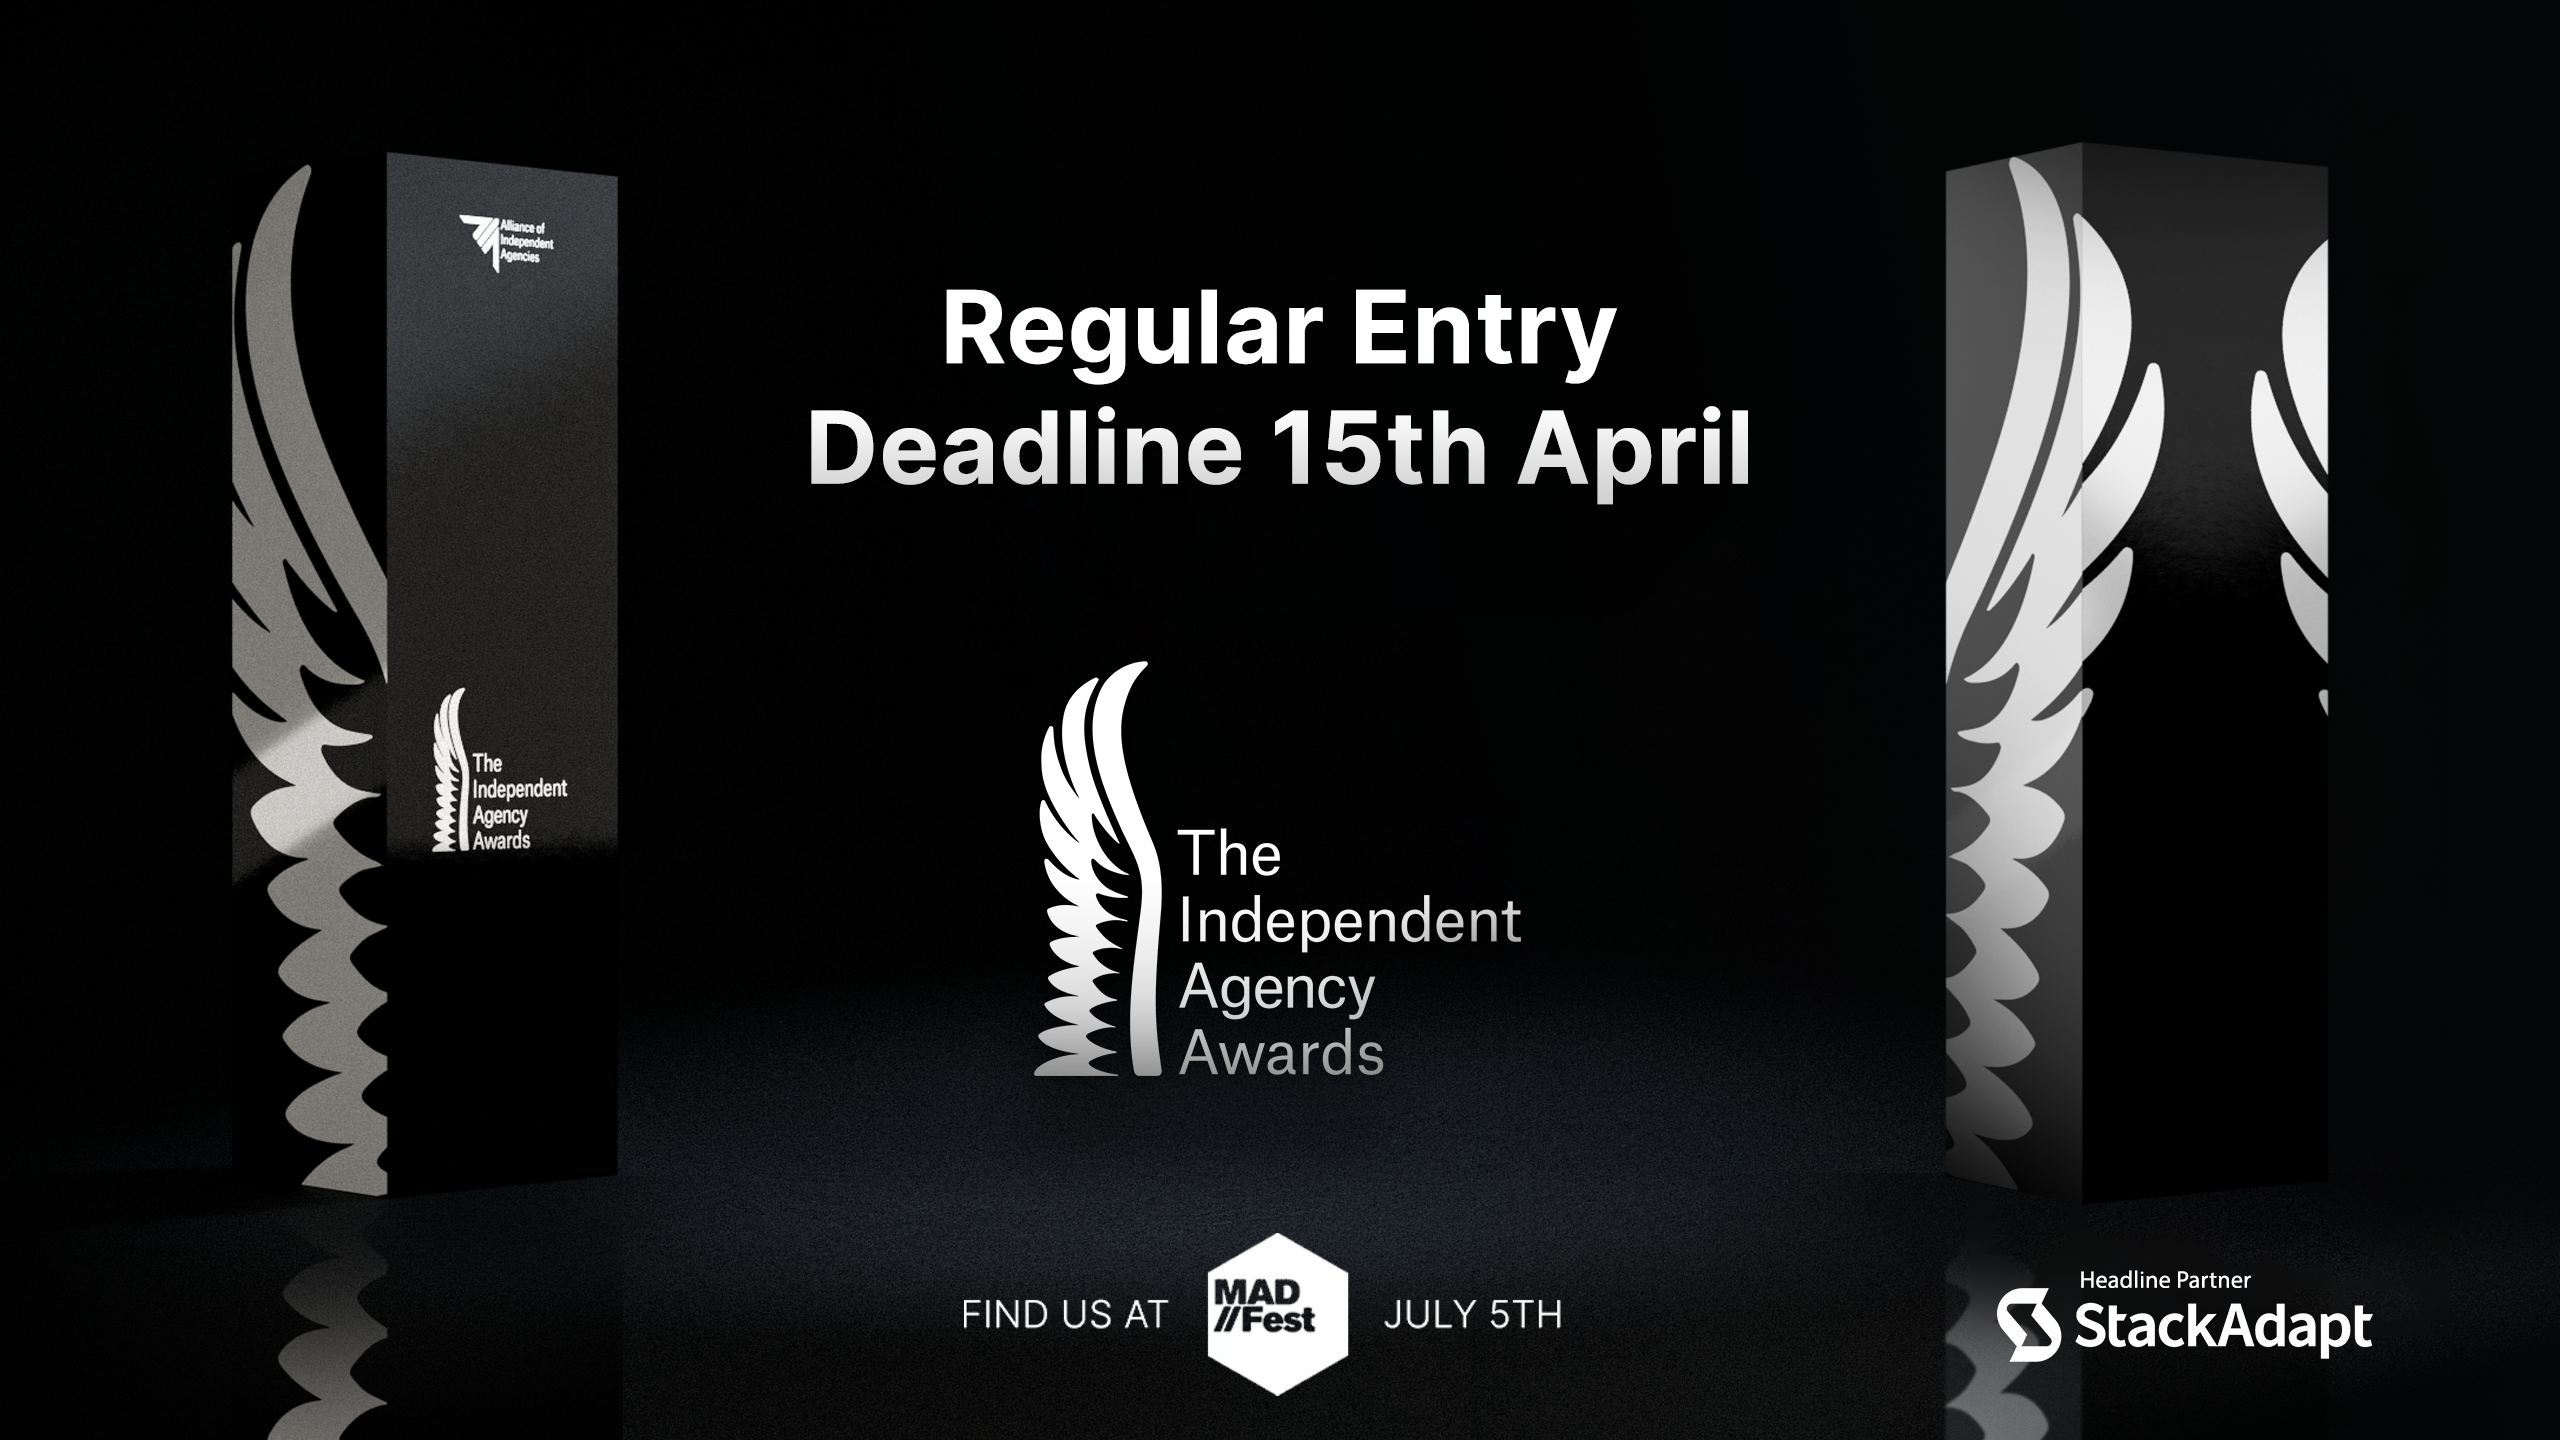 It’s time to enter The Independent Agency Awards!